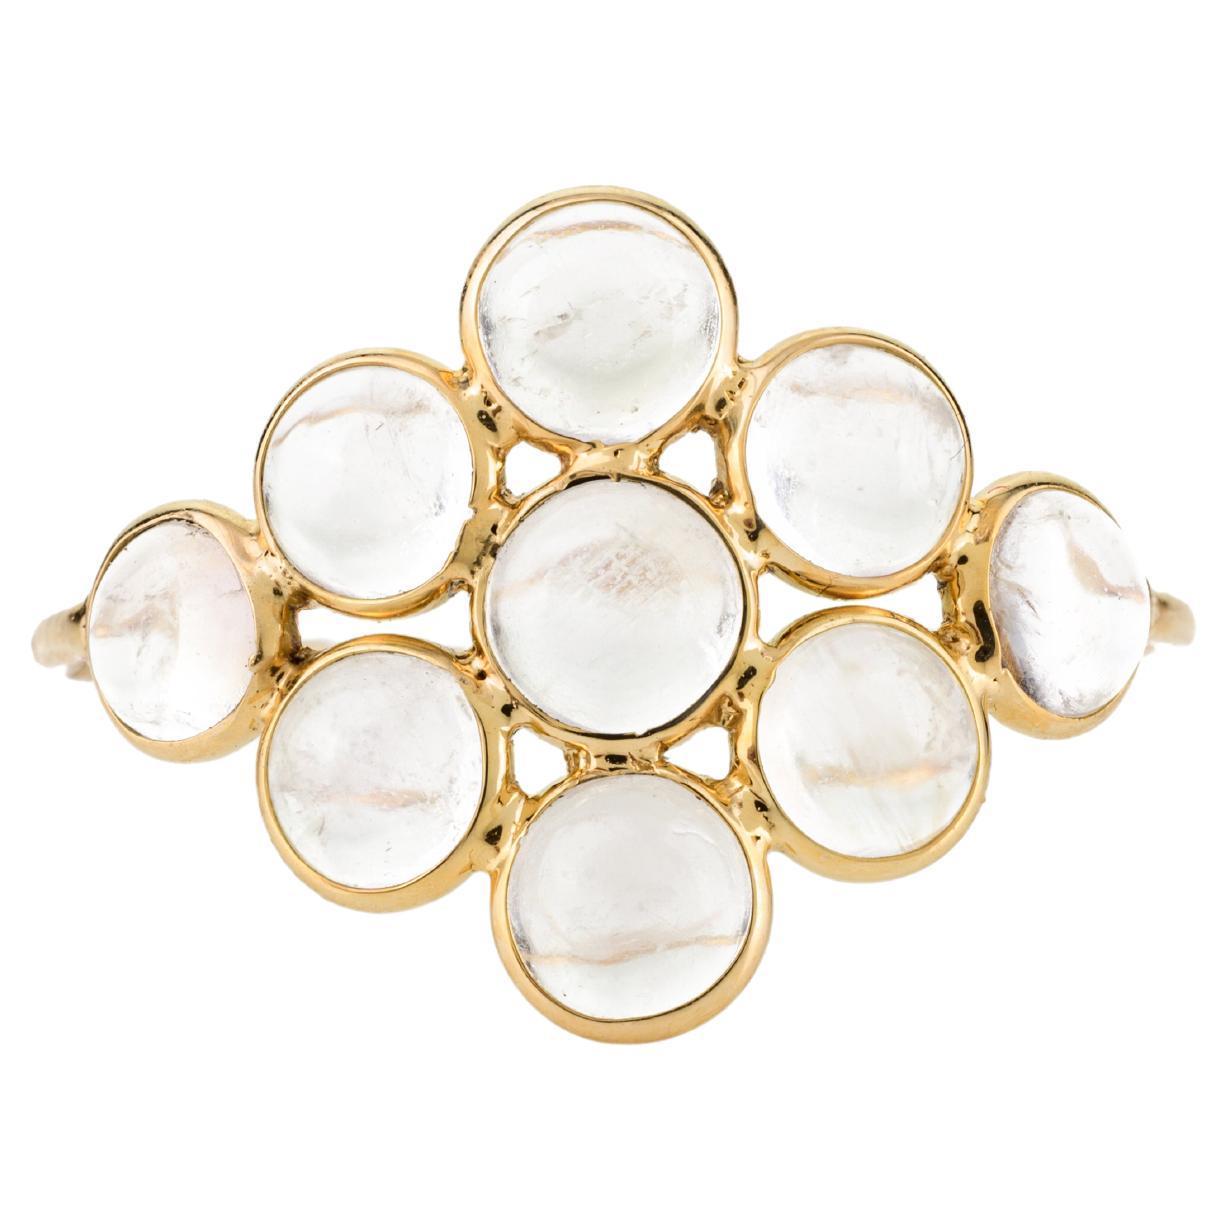 For Sale:  Rainbow Moonstone Cluster Flower Ring in 18k Solid Yellow Gold